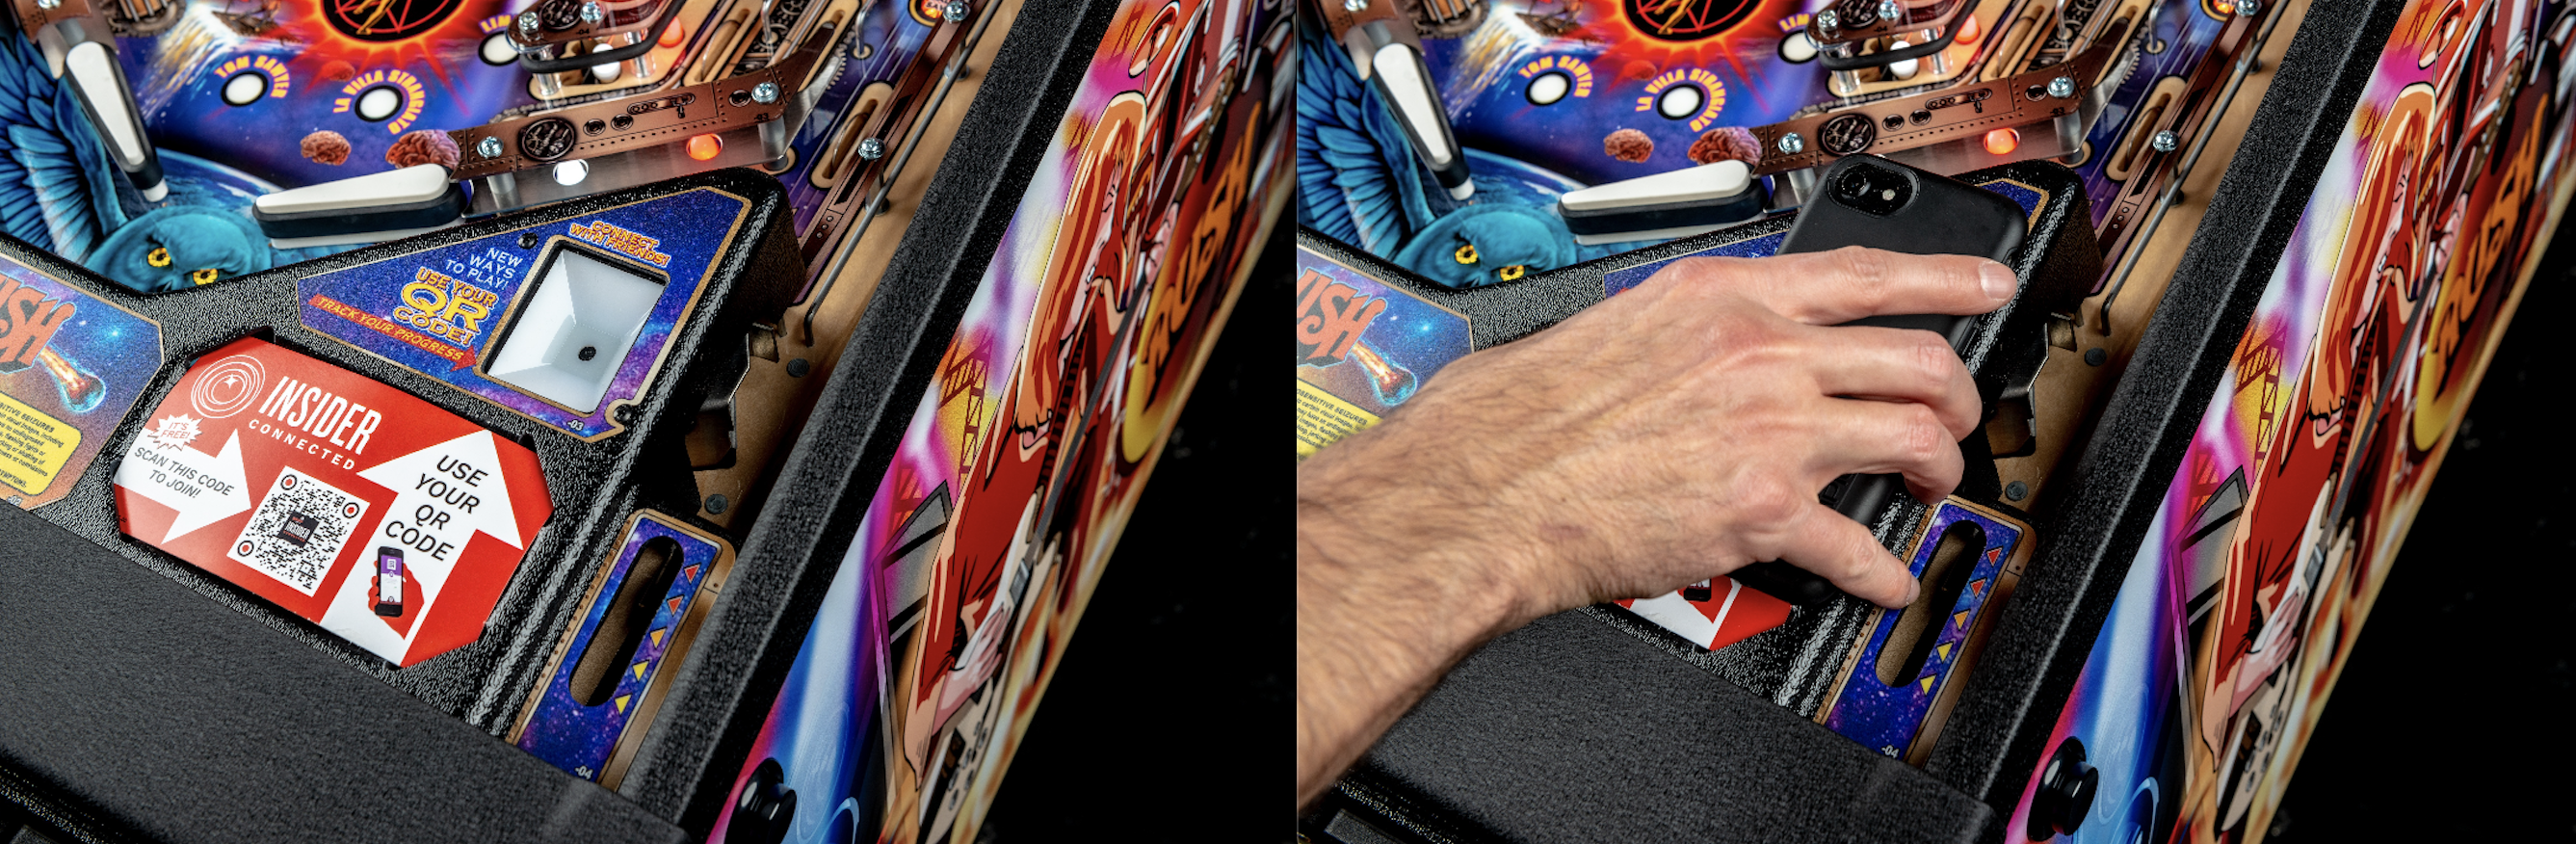 Stern Pinball Announces RUSH PINBALL! DEEP DIVE: In Depth Overview of the  Machine, Features, Rules, and More! - This Week in Pinball